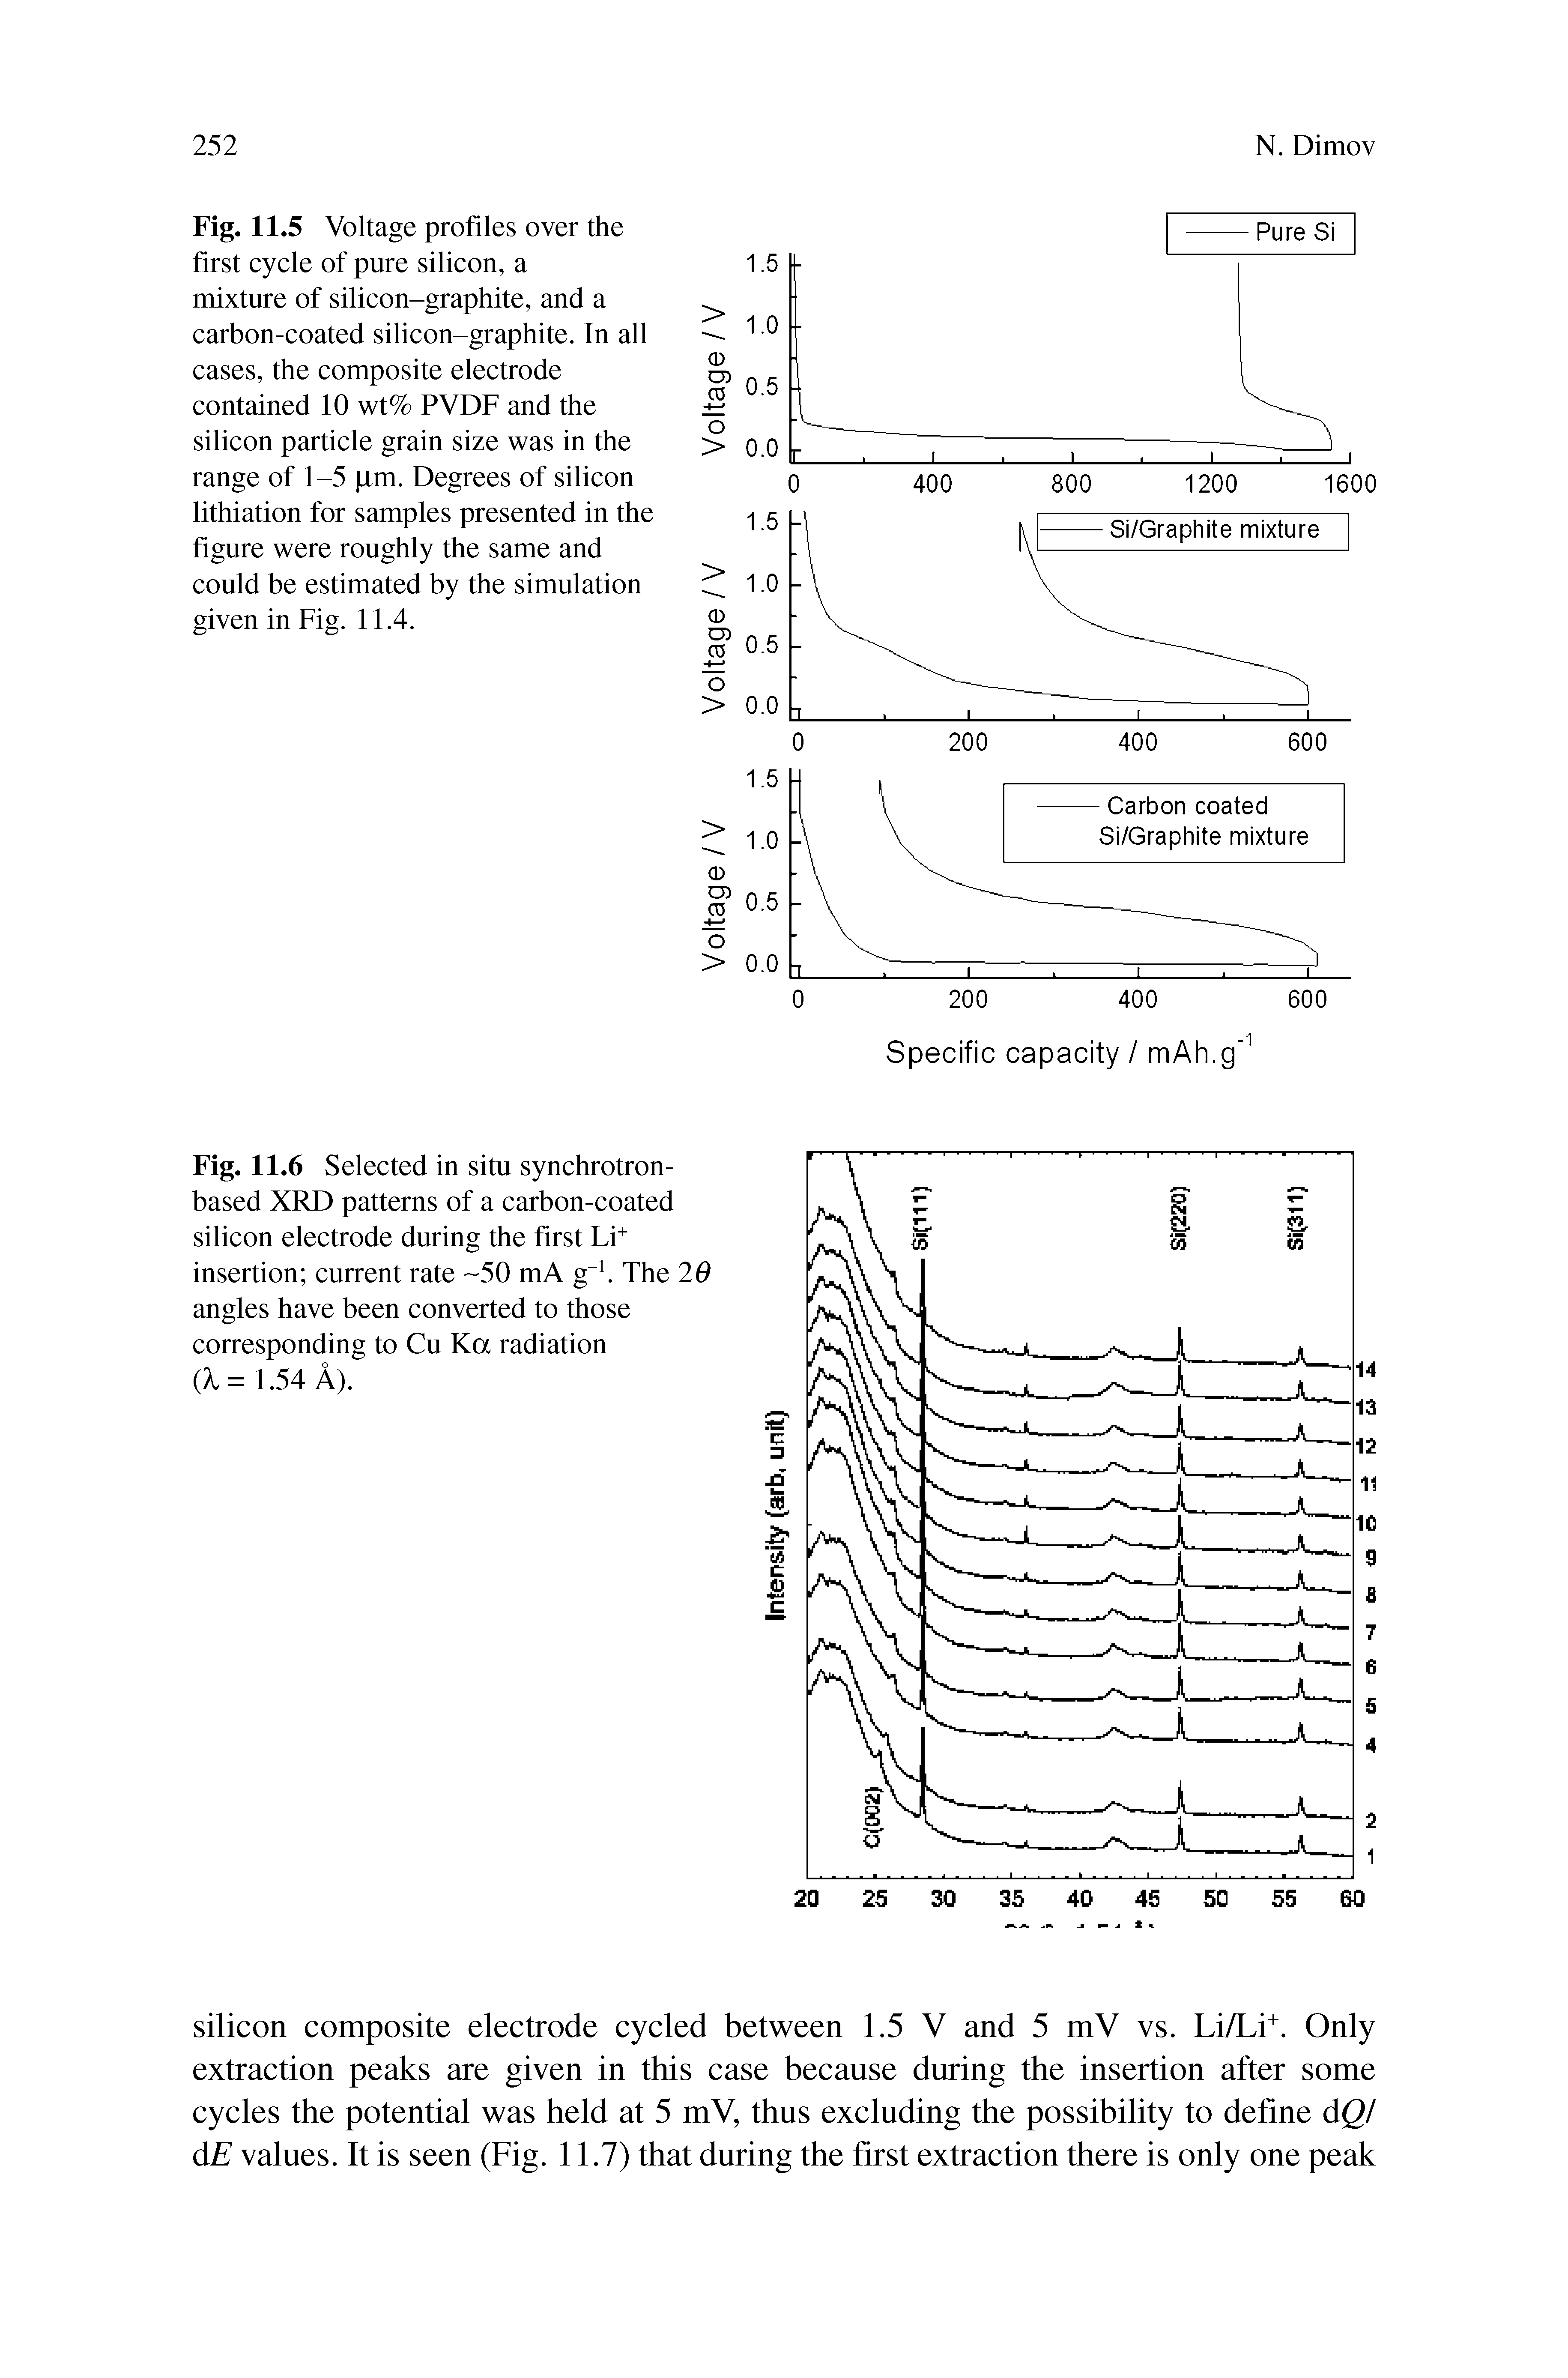 Fig. 11.5 Voltage profiles over the first cycle of pure silicon, a mixture of silicon-graphite, and a carbon-coated silicon-graphite. In all cases, the composite electrode contained 10 wt% PVDF and the silicon particle grain size was in the range of 1-5 pm. Degrees of silicon lithiation for samples presented in the figure were roughly the same and could be estimated by the simulation given in Fig. 11.4.